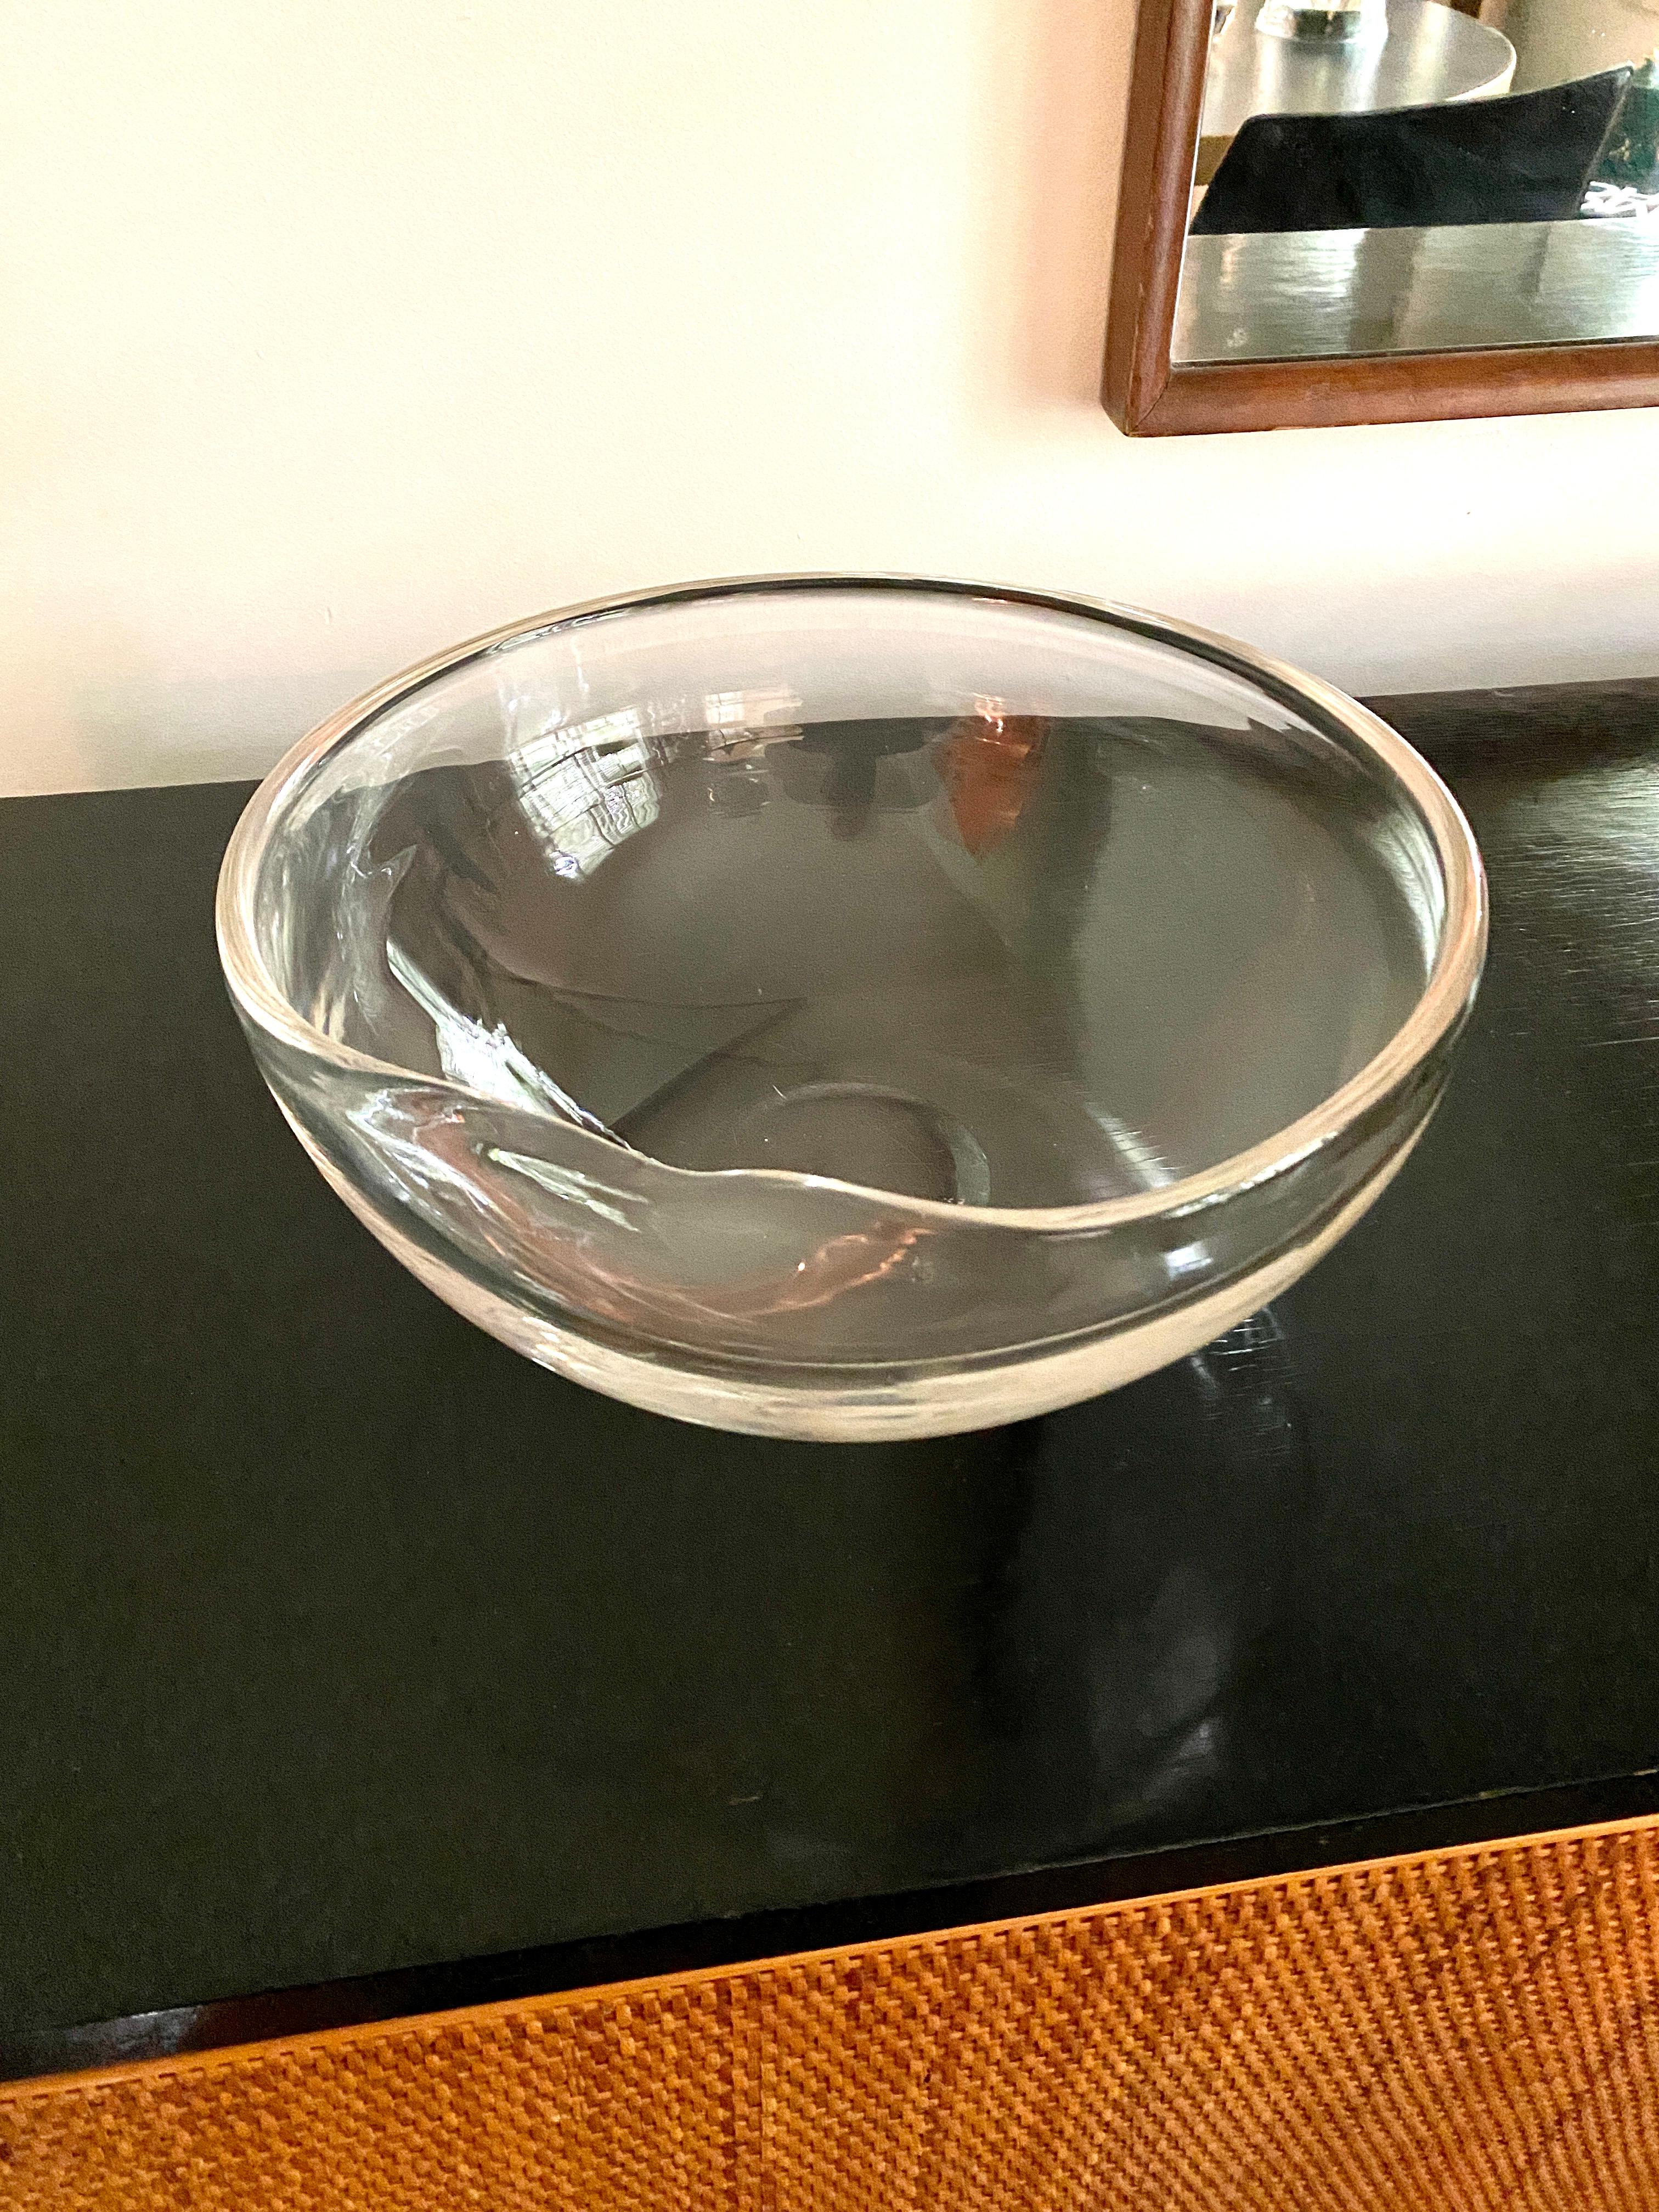 Clear Crystal Tumb Print Bowl Designed by Elsa Peretti for Tiffany In Good Condition For Sale In Doraville, GA